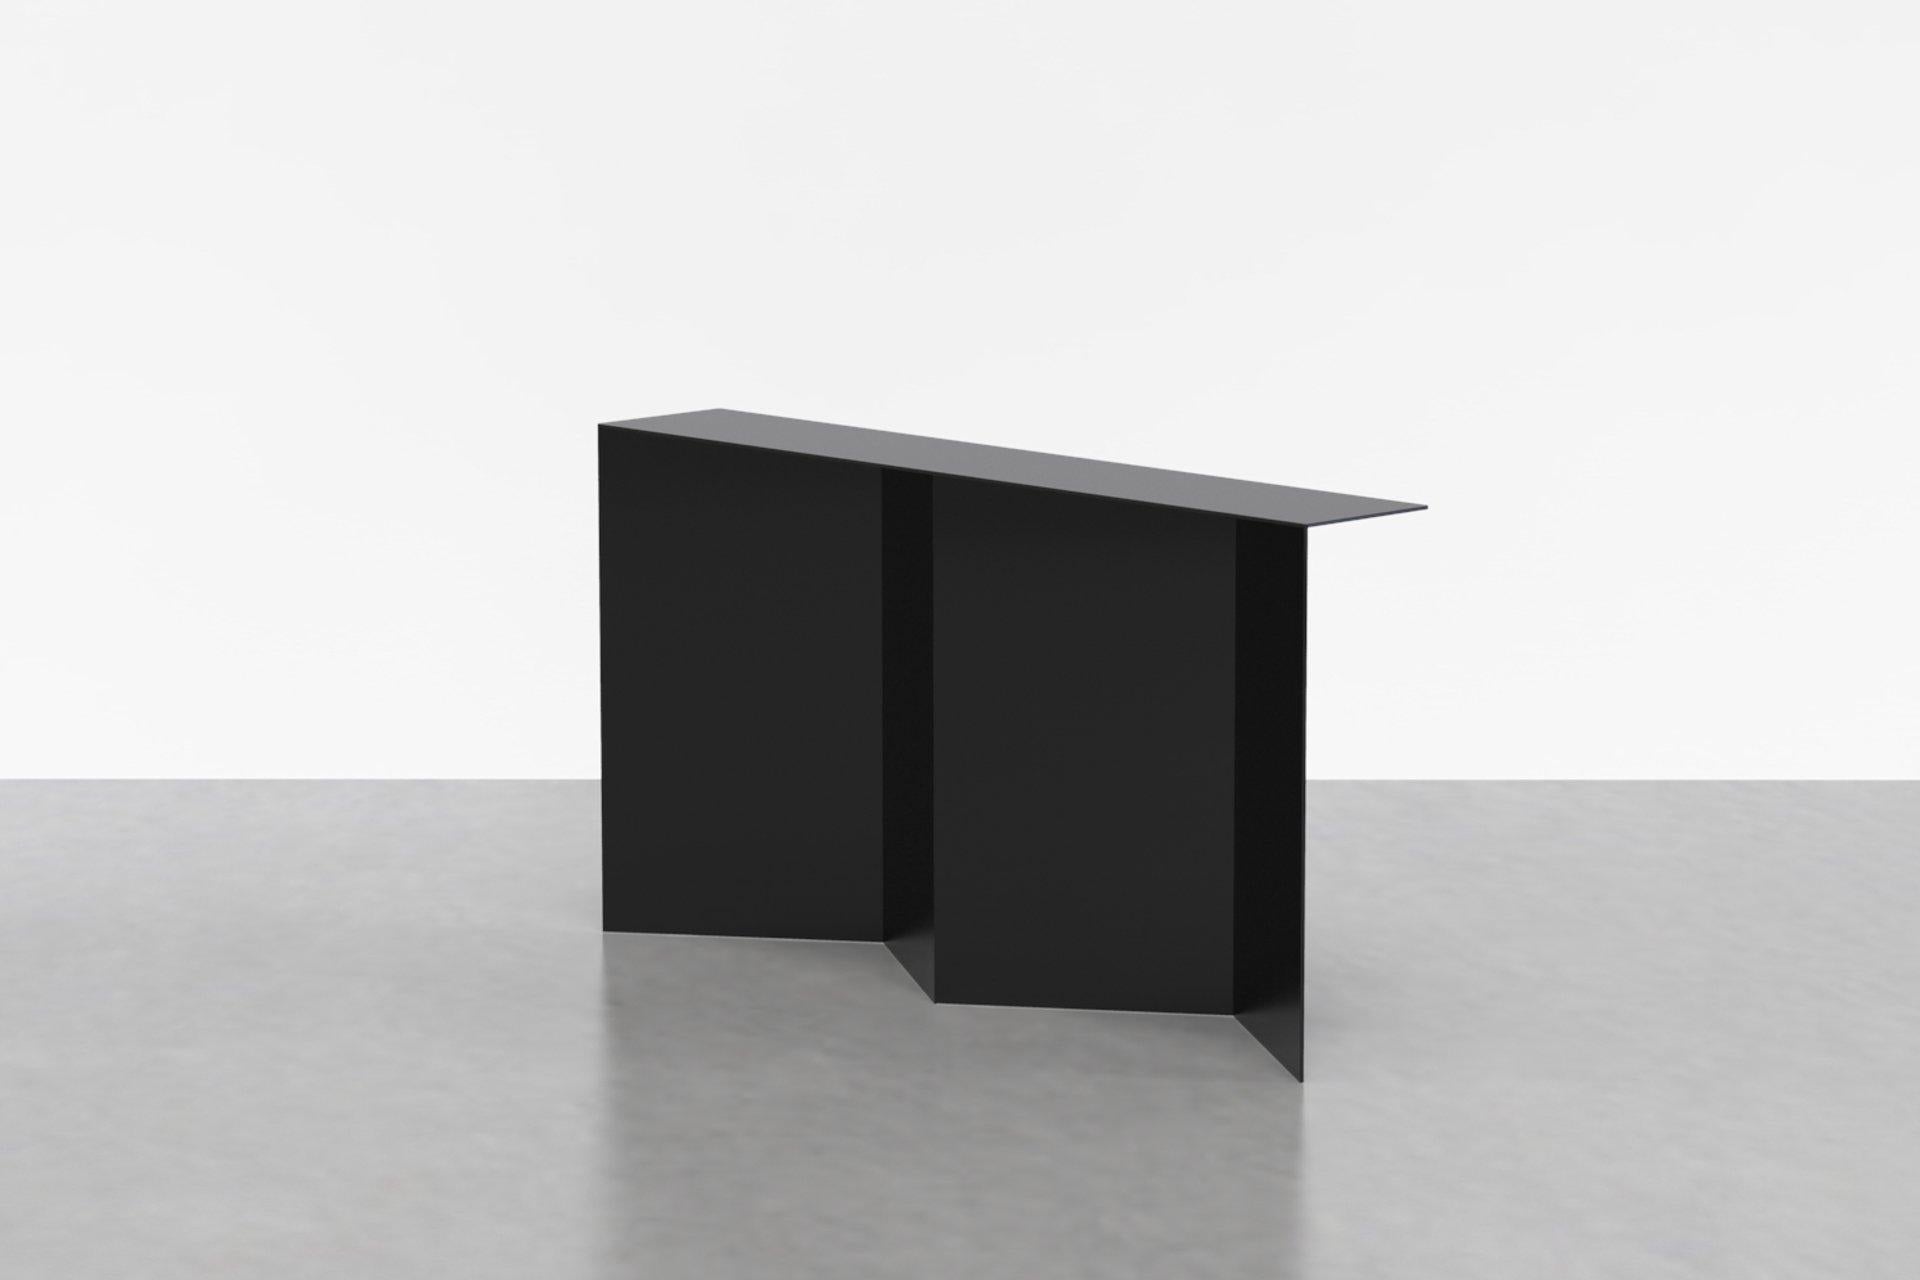 The tack console explores the nuances of minimal planes, angles, and intersections. Made from powder-coated aluminum that is seamlessly welded together, the Tack console is an elegant sculptural addition to any lobby, foyer, or hallway. Available in